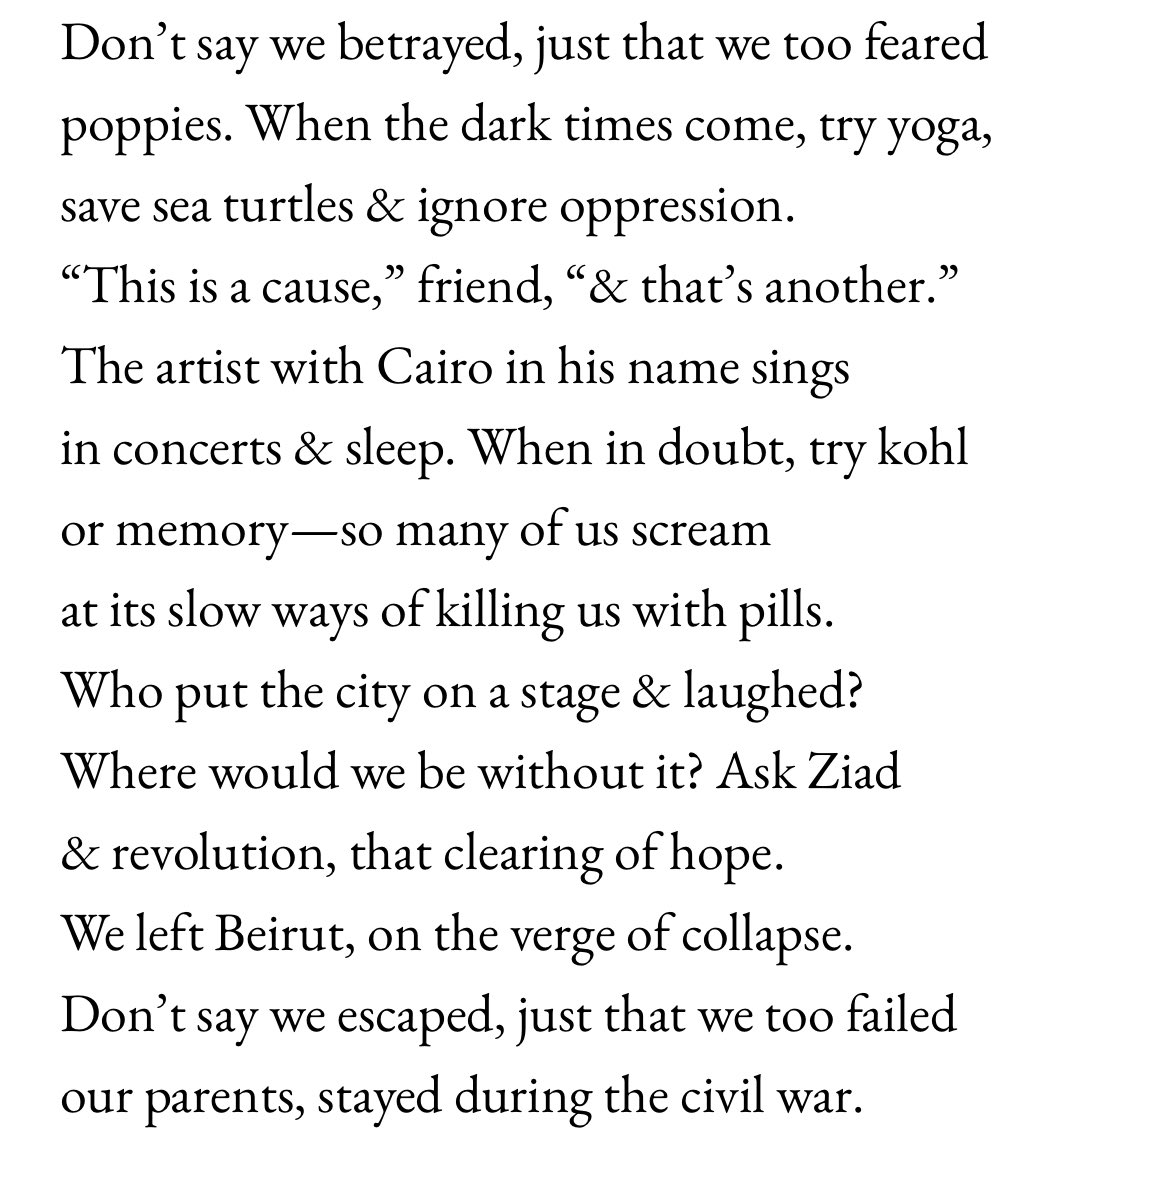 New sonnet with references to Cairokee & Ziad. Don’t say we escaped, just that we too failed. My gratitude to @rocketfantastic for giving this one a home in Southern Cultures southerncultures.org/article/sea-tu…